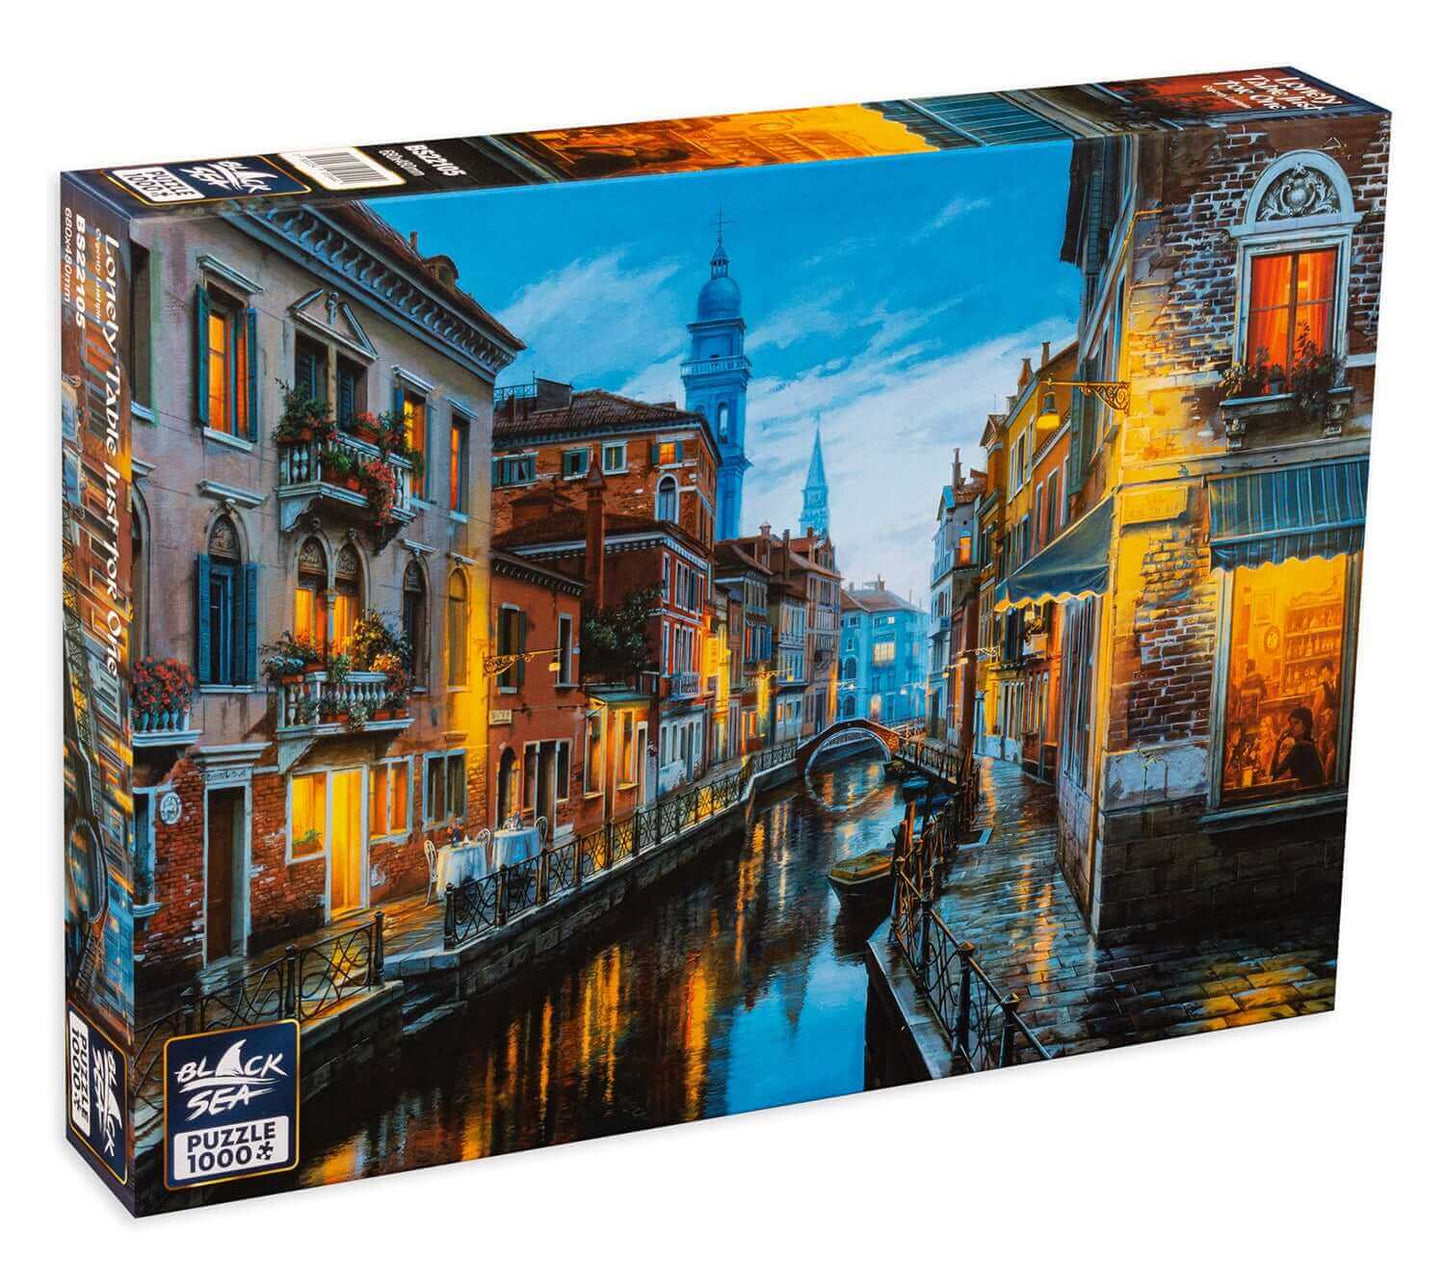 Puzzle Black Sea 1000 pieces - A table for one